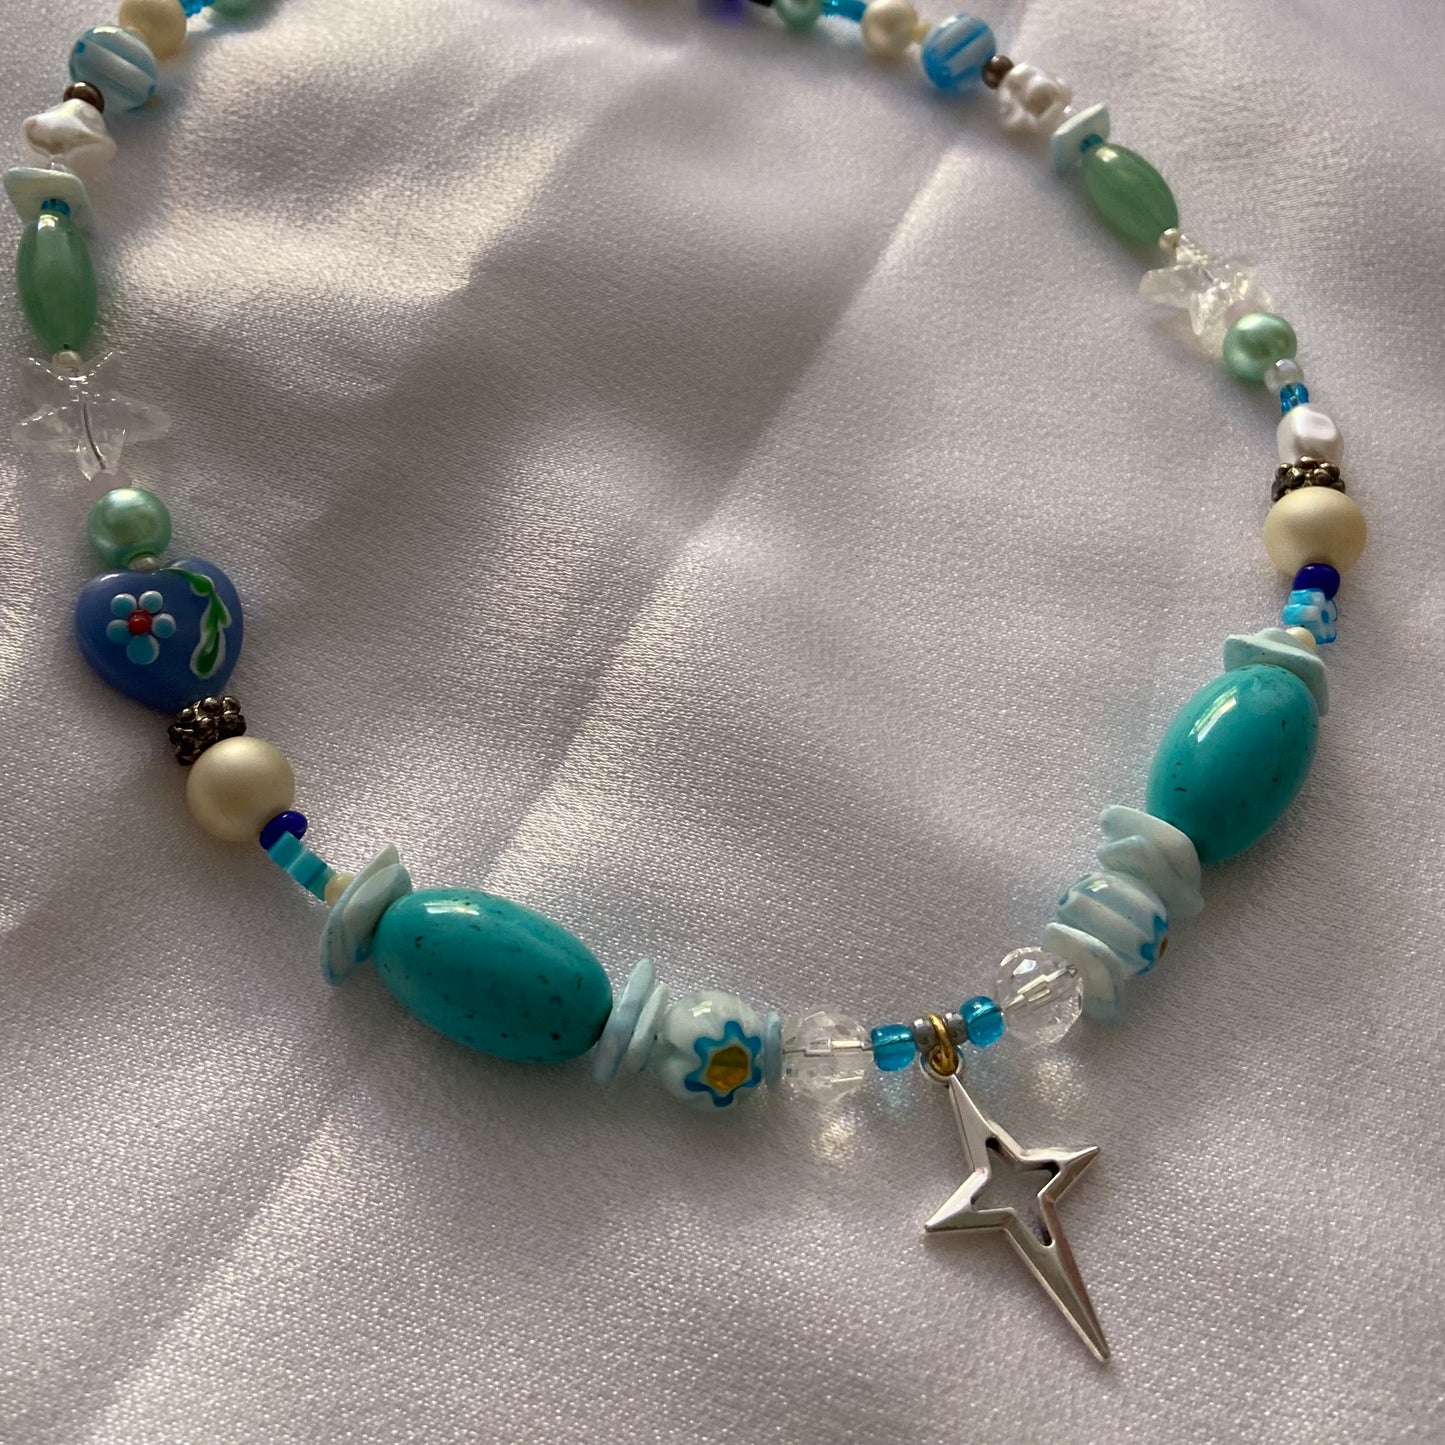 “River Star” Necklace